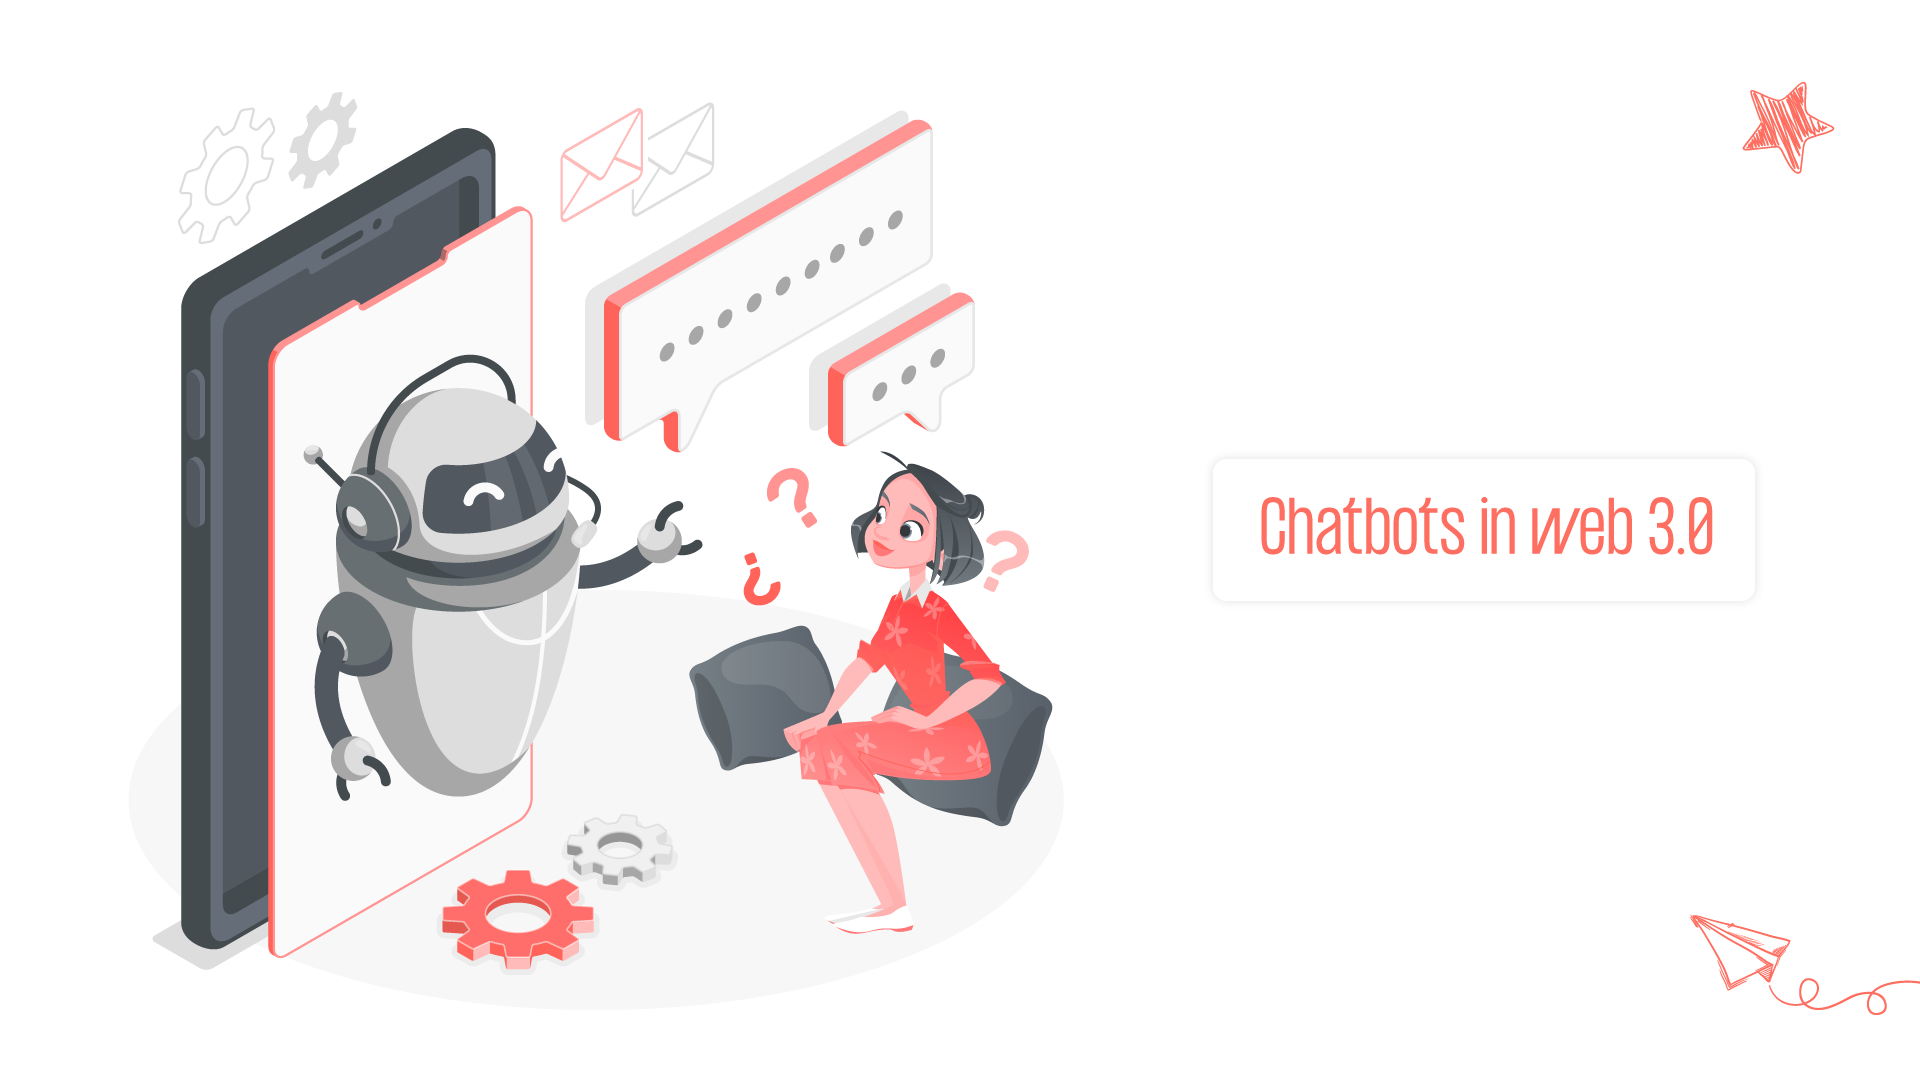 Chatbots in web 3.0